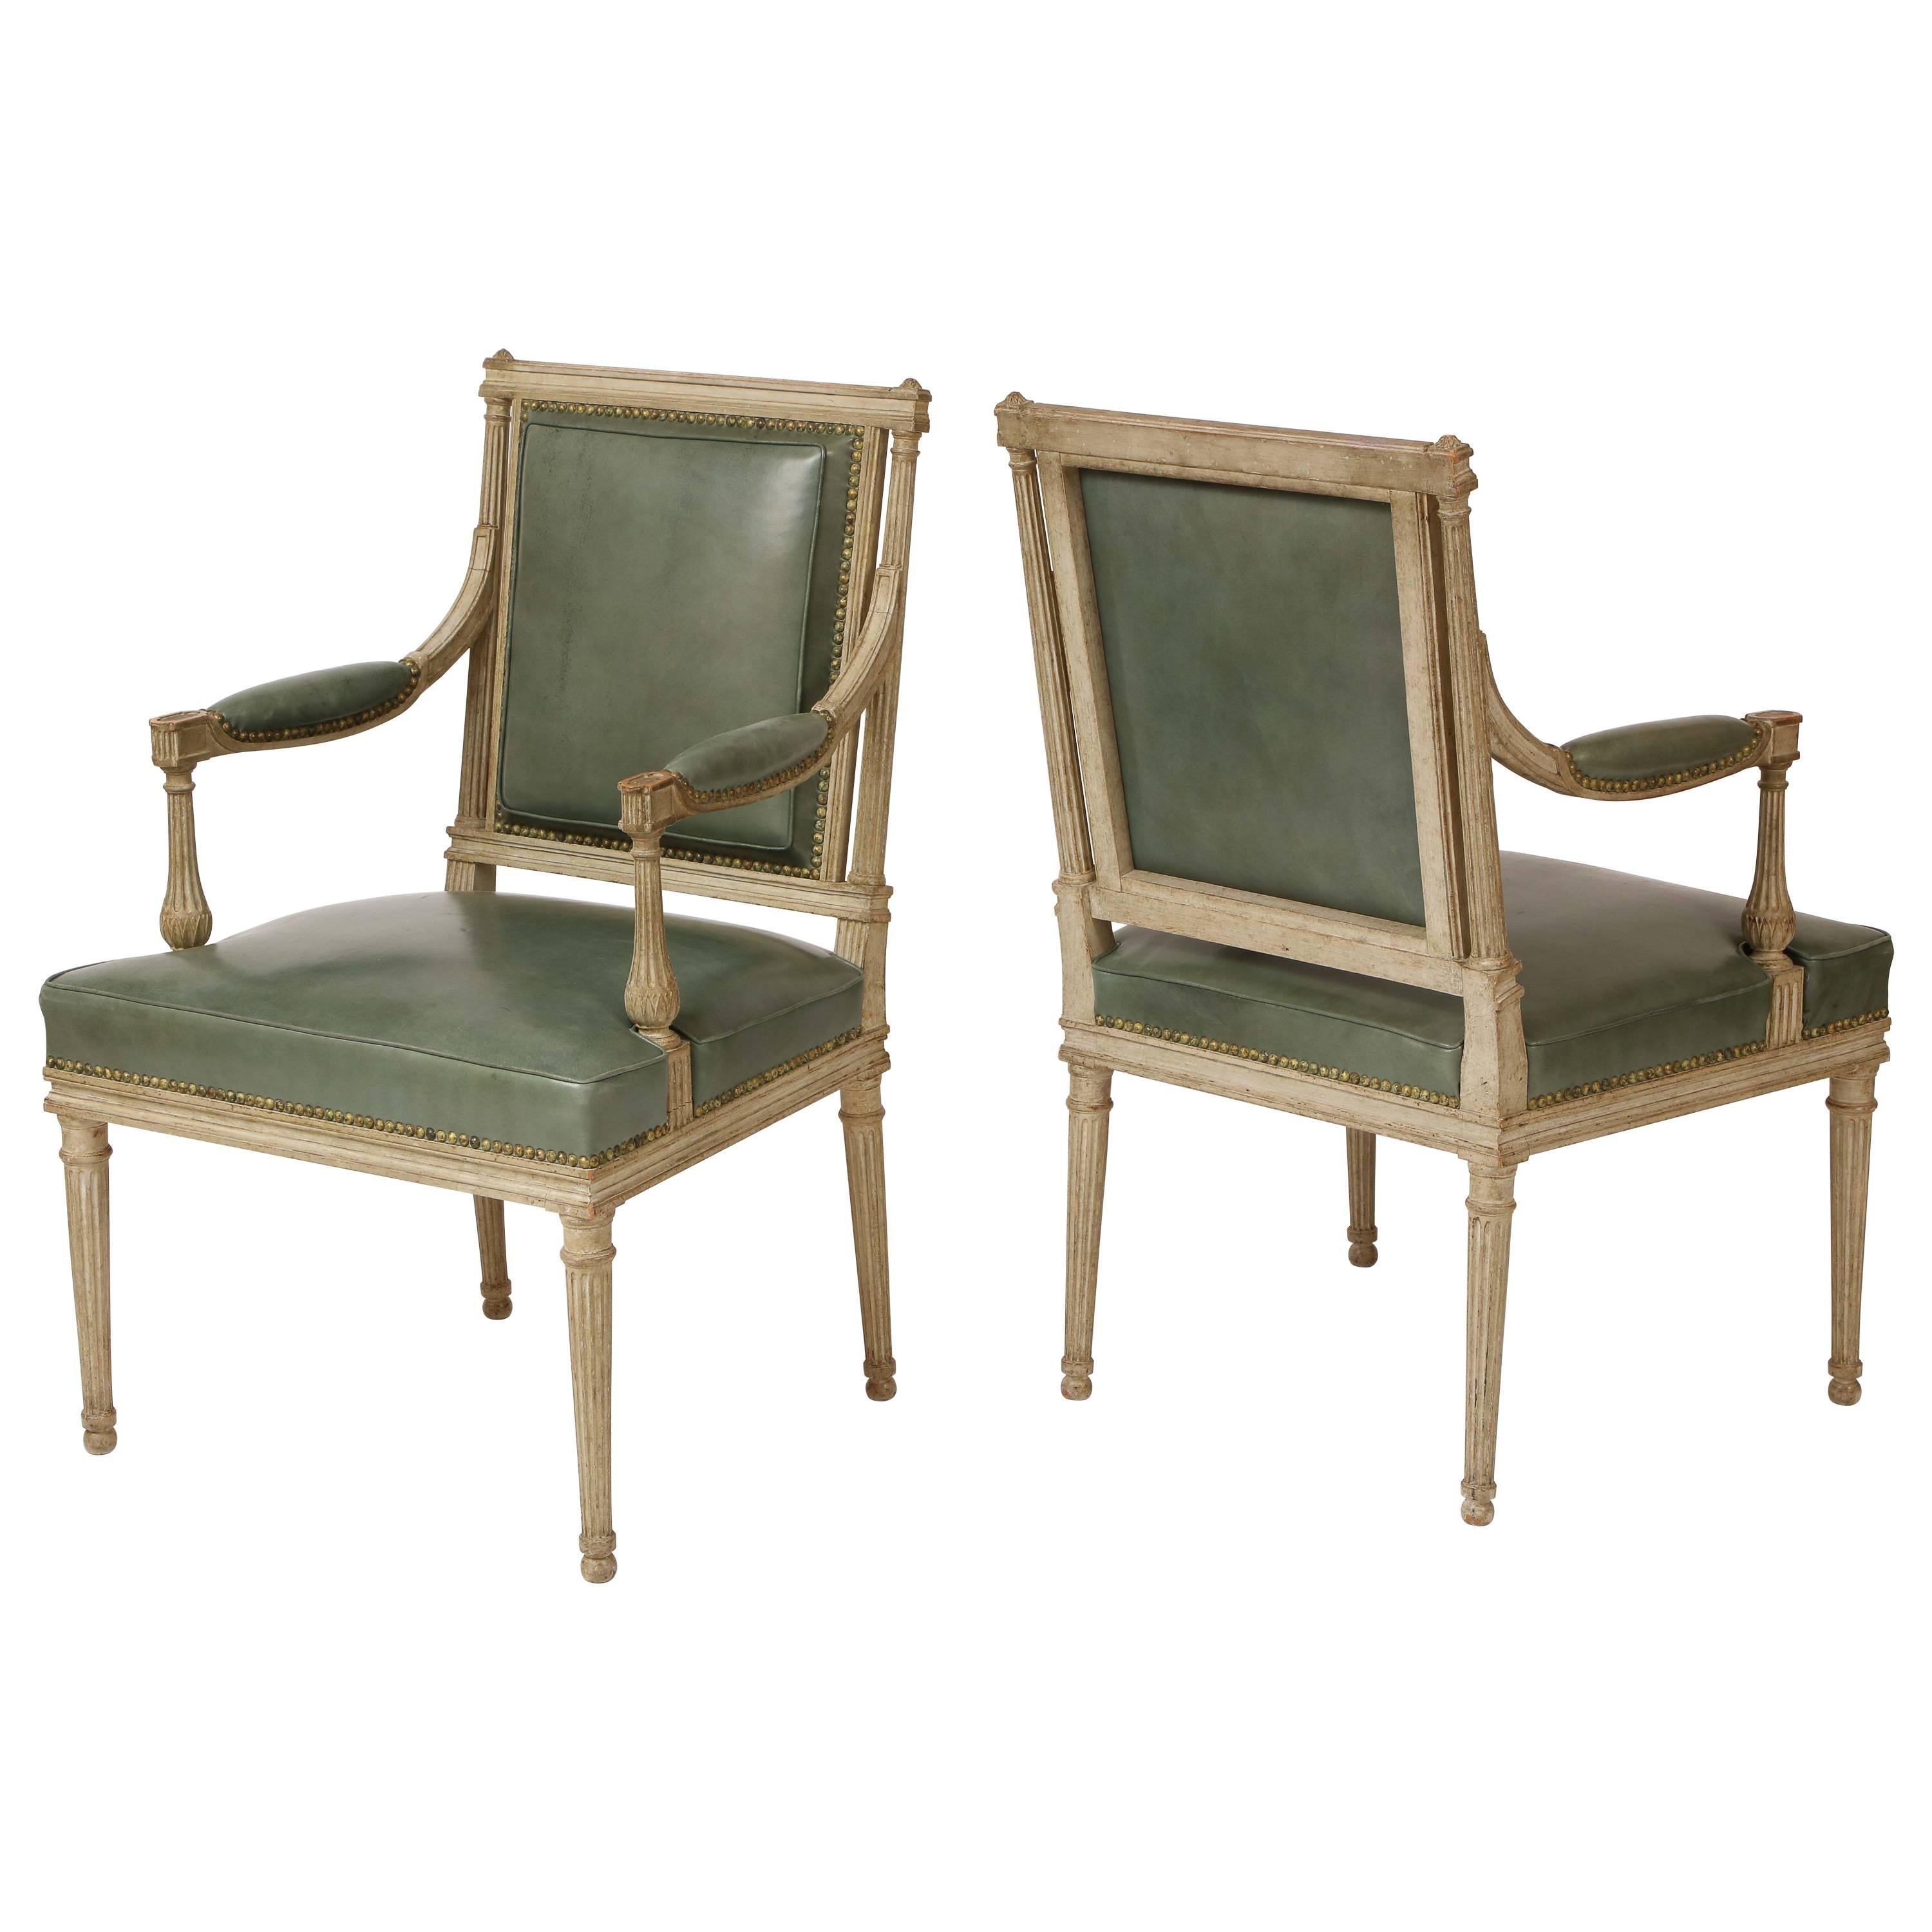 Pair of French Neoclassical Armchairs in the Louis XVI Taste by Madison Jansen